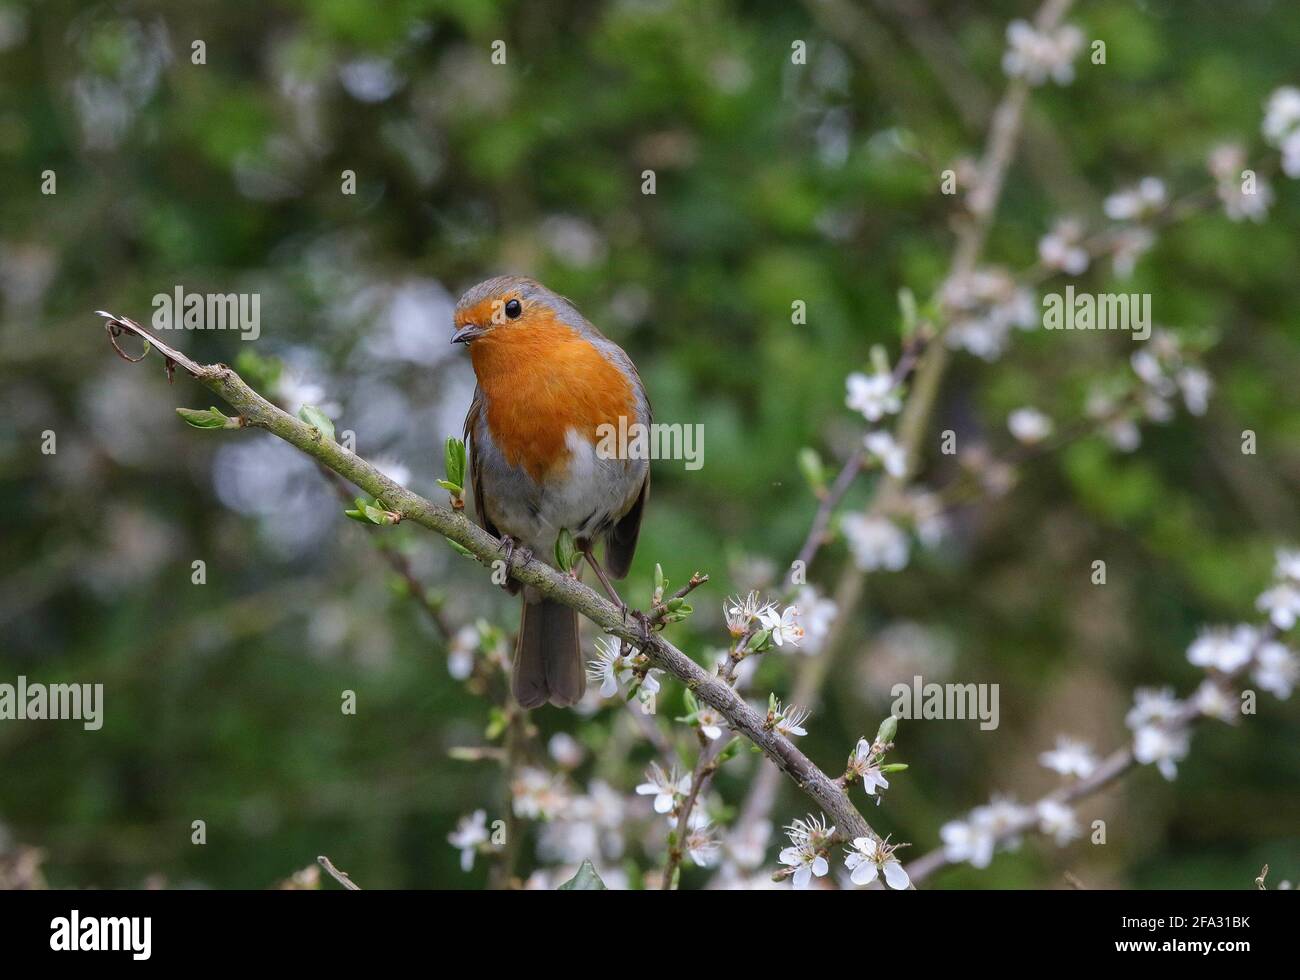 Oxford Island, Lough Neagh, County Armagh, Northern Ireland, UK. 22 Apr 2021. UK weather – a calm day with high pressure prevailing. After a hazy start the sun began to burn through the thin layer of cloud and it is to remain dry until at least the start of next week. Inquisitive - a robin perched on blossom at Oxford Island, Lough Neagh.  Credit: CAZIMB/Alamy Live News. Stock Photo